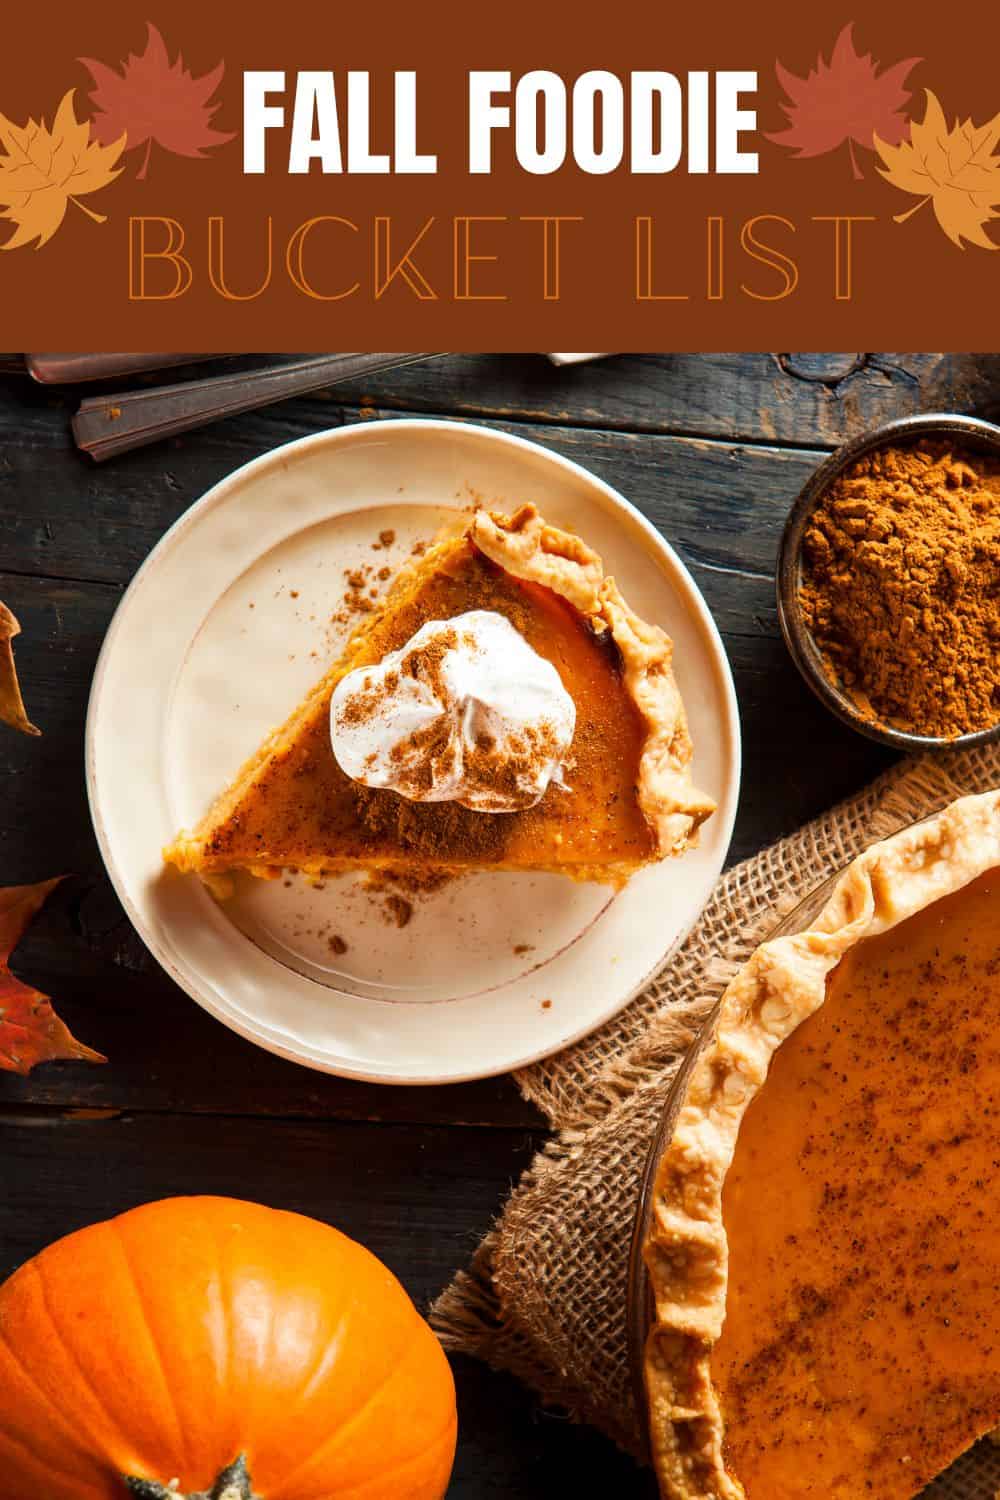 We’ve compiled a list of our favorite fall foods. How many of these foods can you add to your fall food bucket list this year? #fallfoods #autumn #fallfoodideas